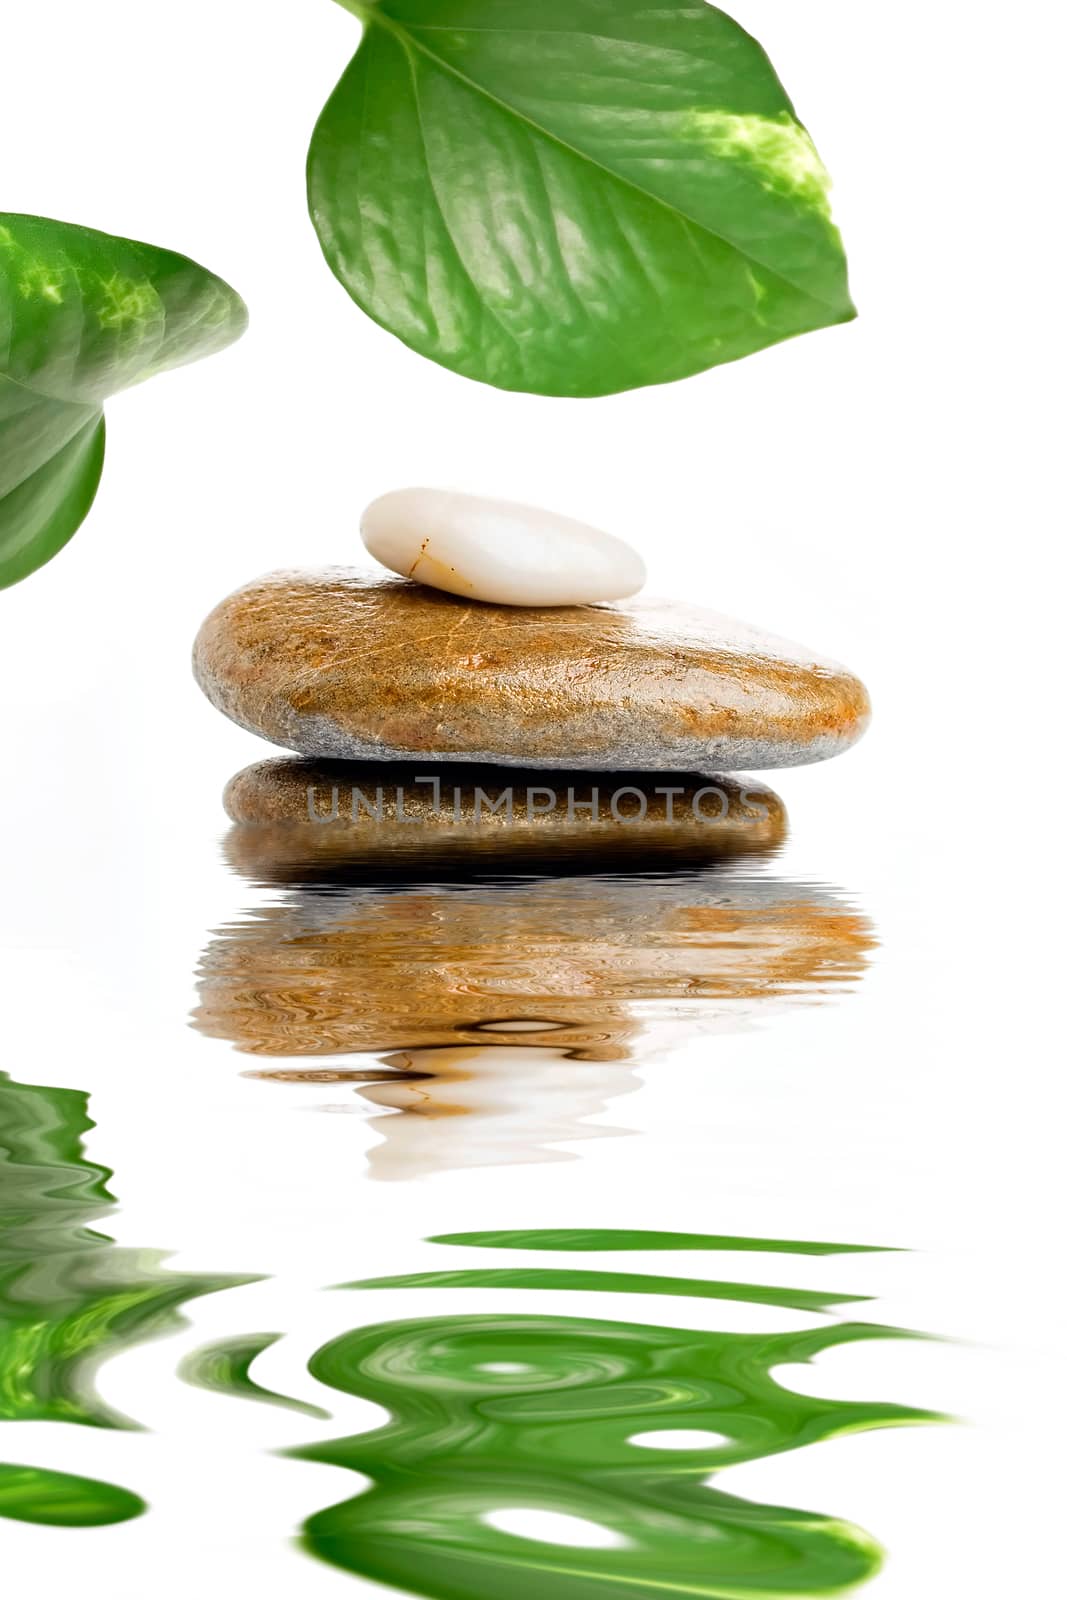 Composition of stones on water creating reflections